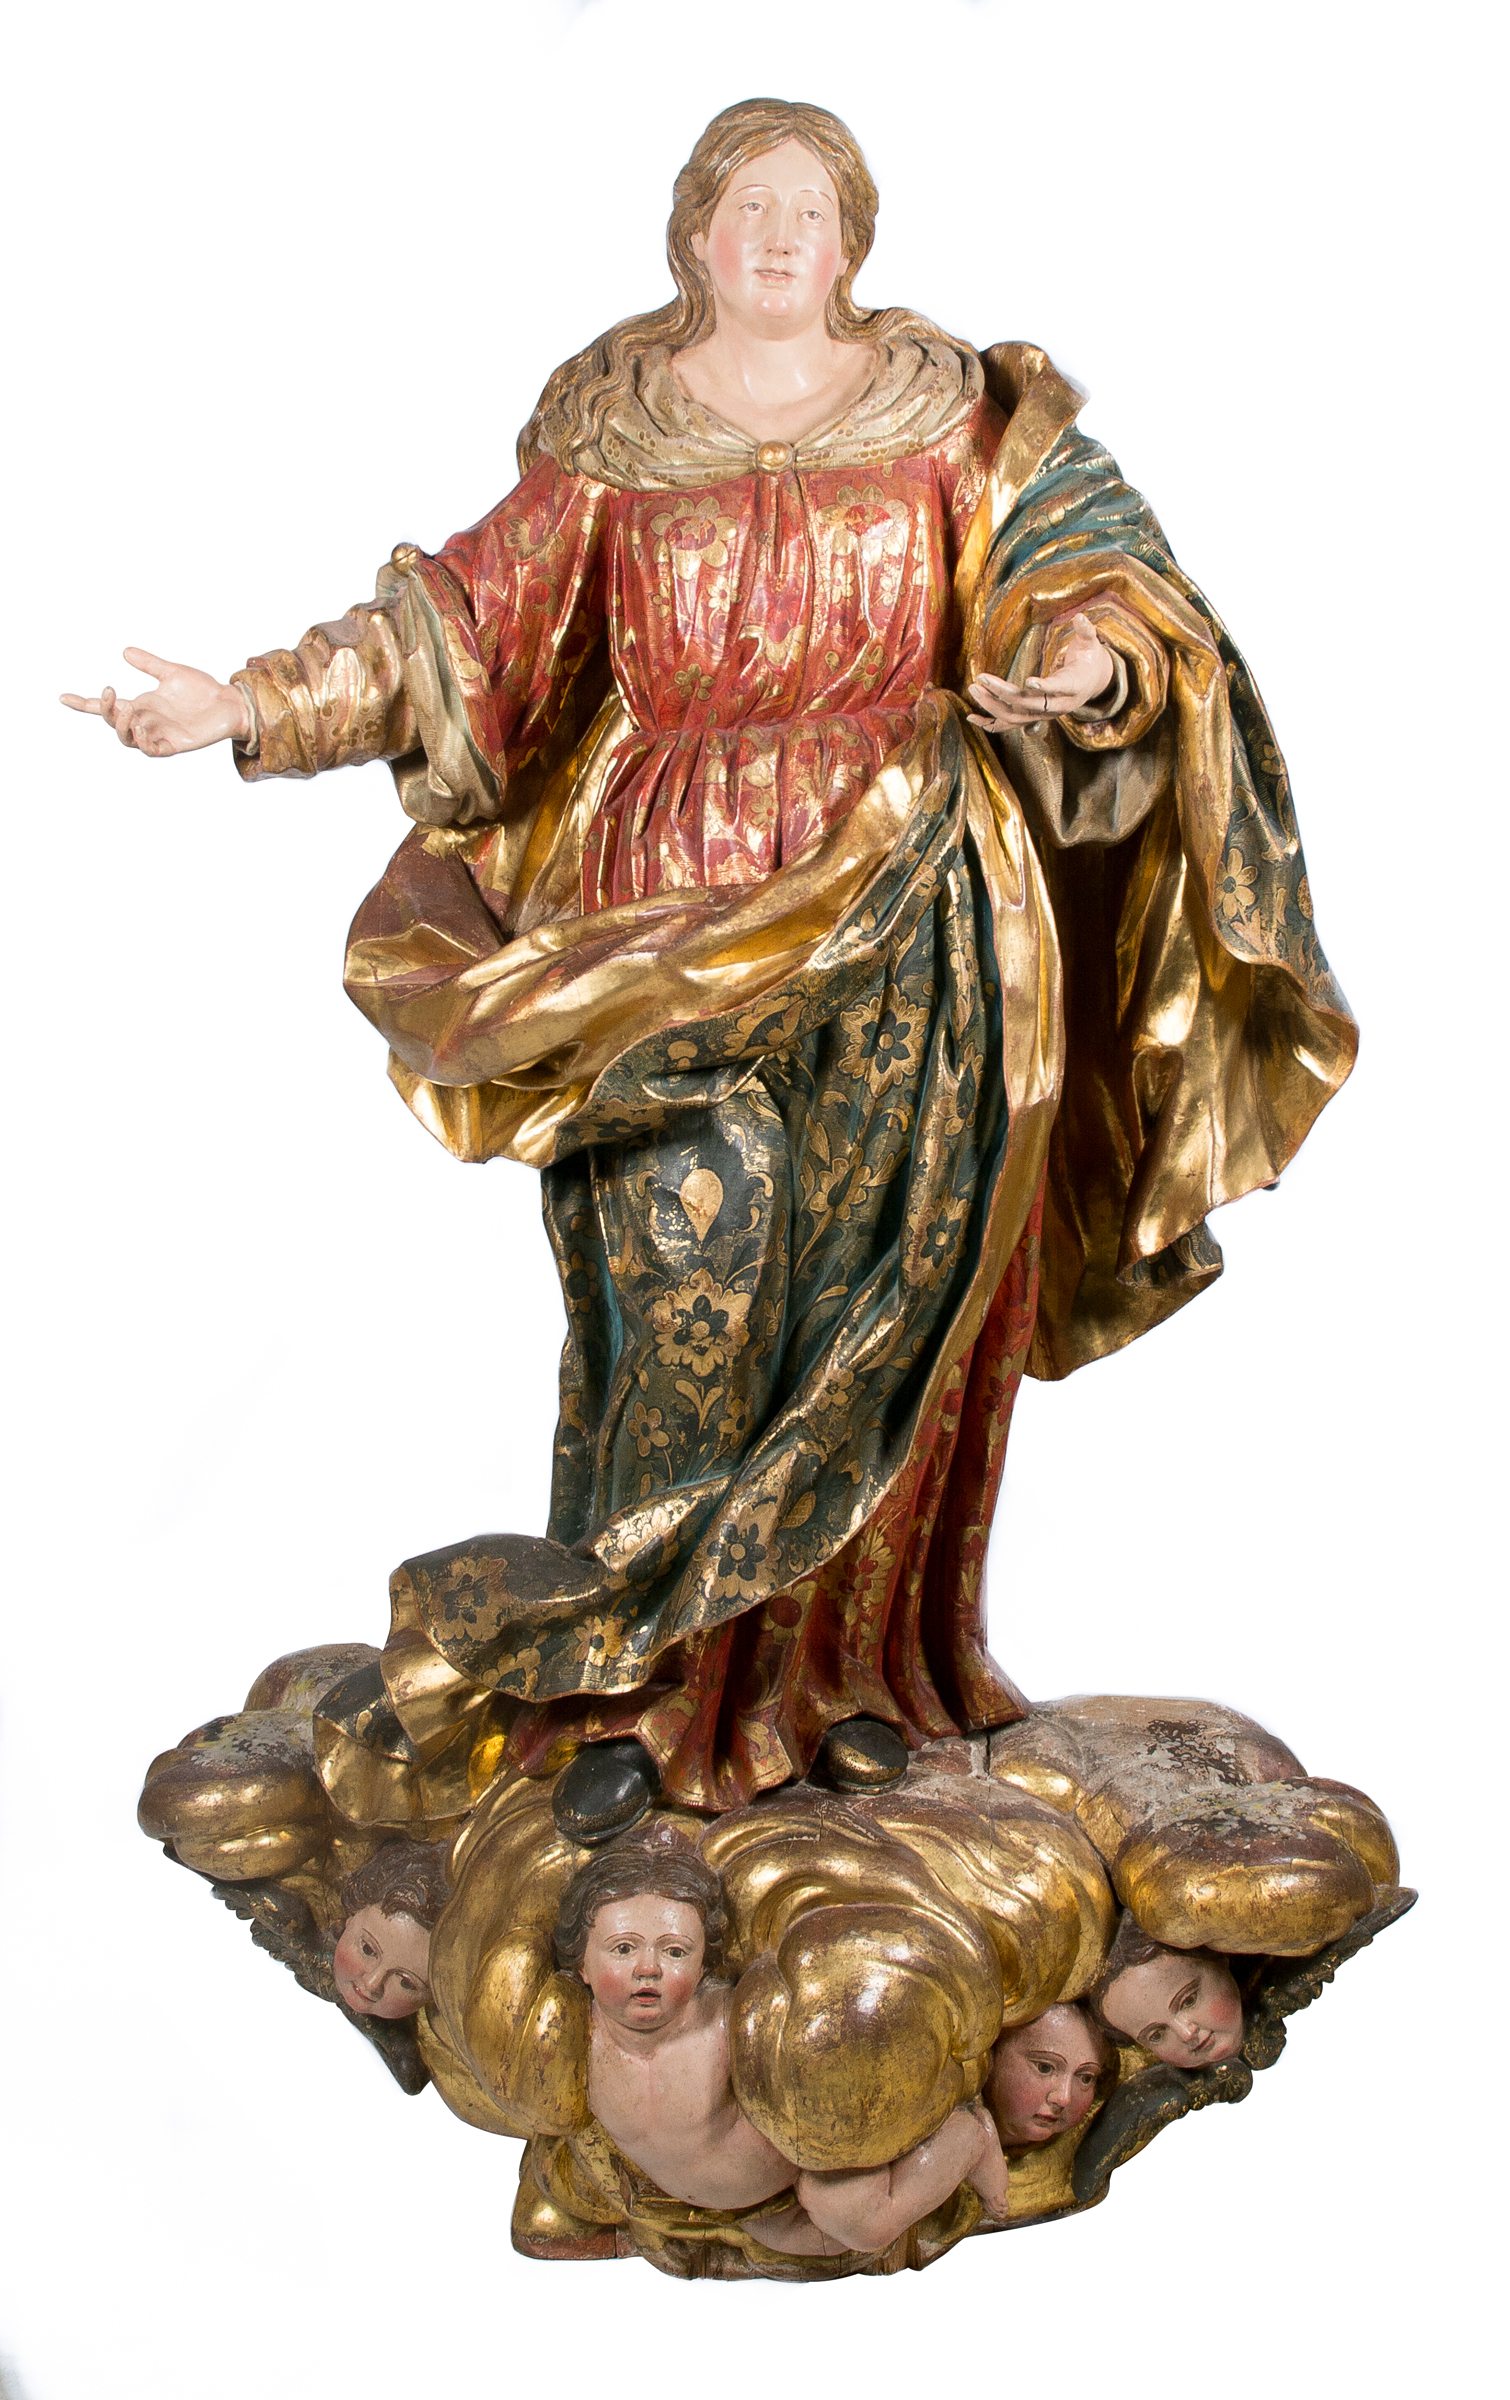 "Our Lady Immaculate". Monumental carved, gilded and polychromed wooden sculpture. Castilian Scho